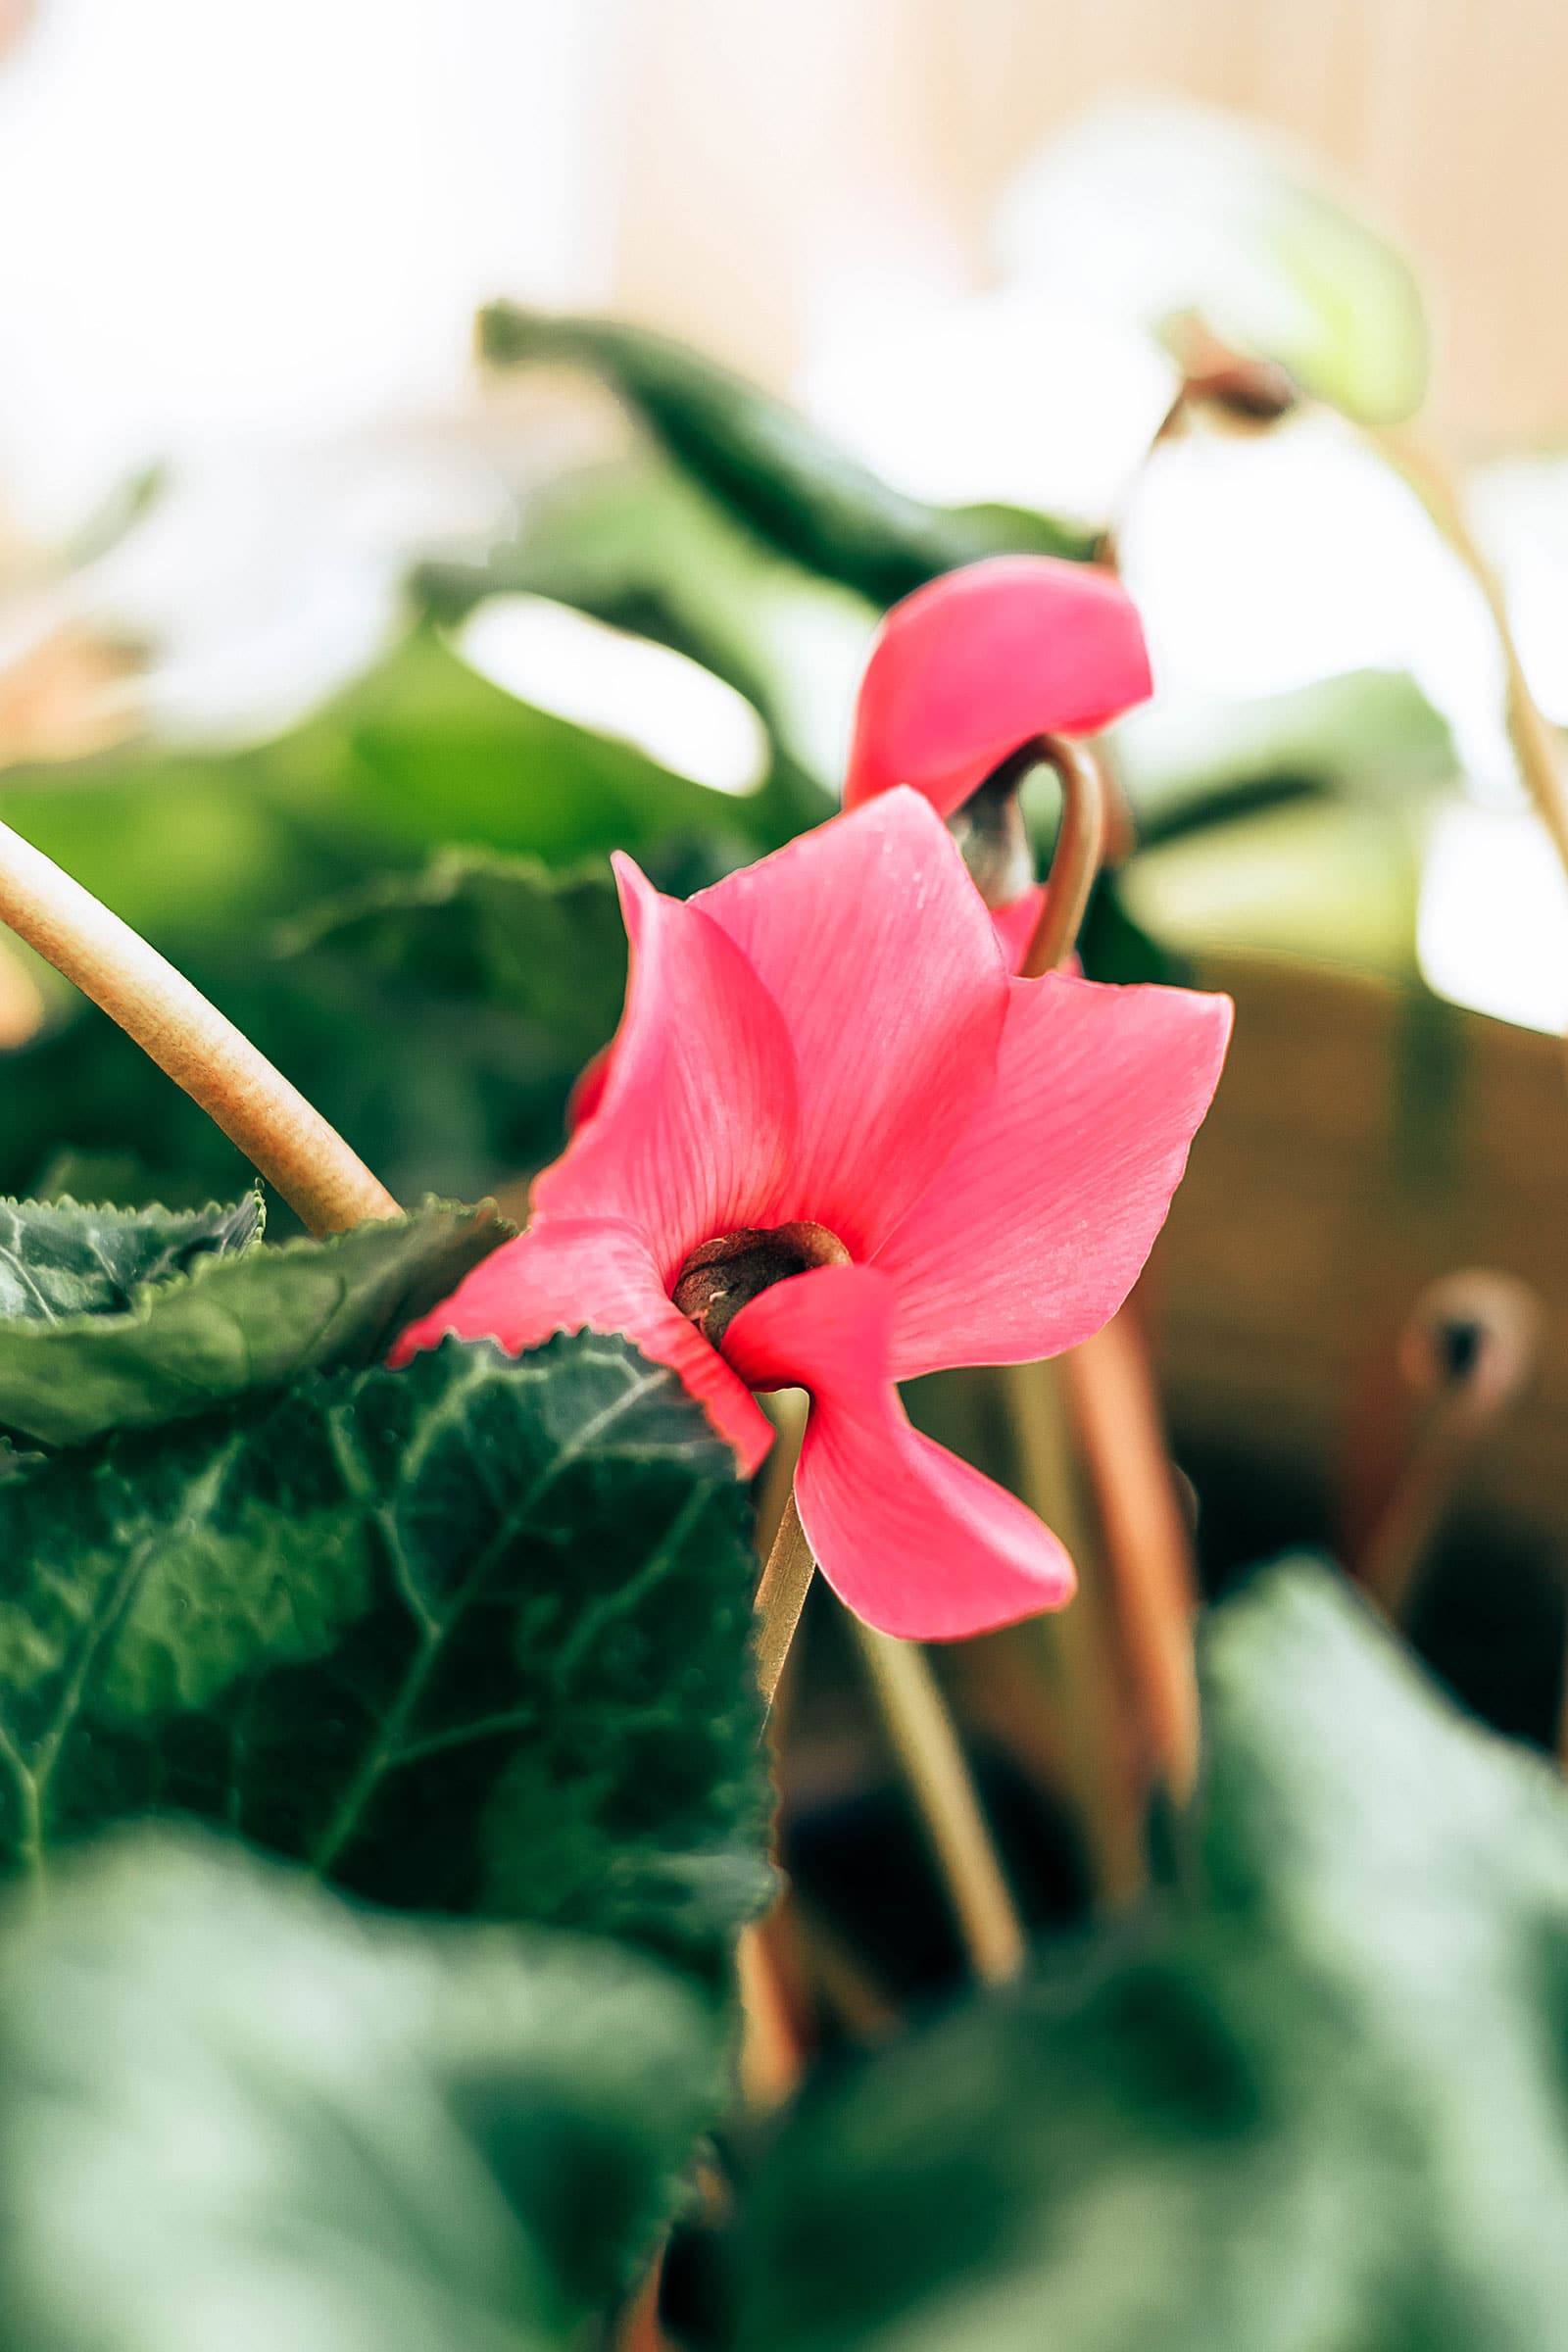 Close-up of a pink cyclamen flower with leaves out of focus in the foreground